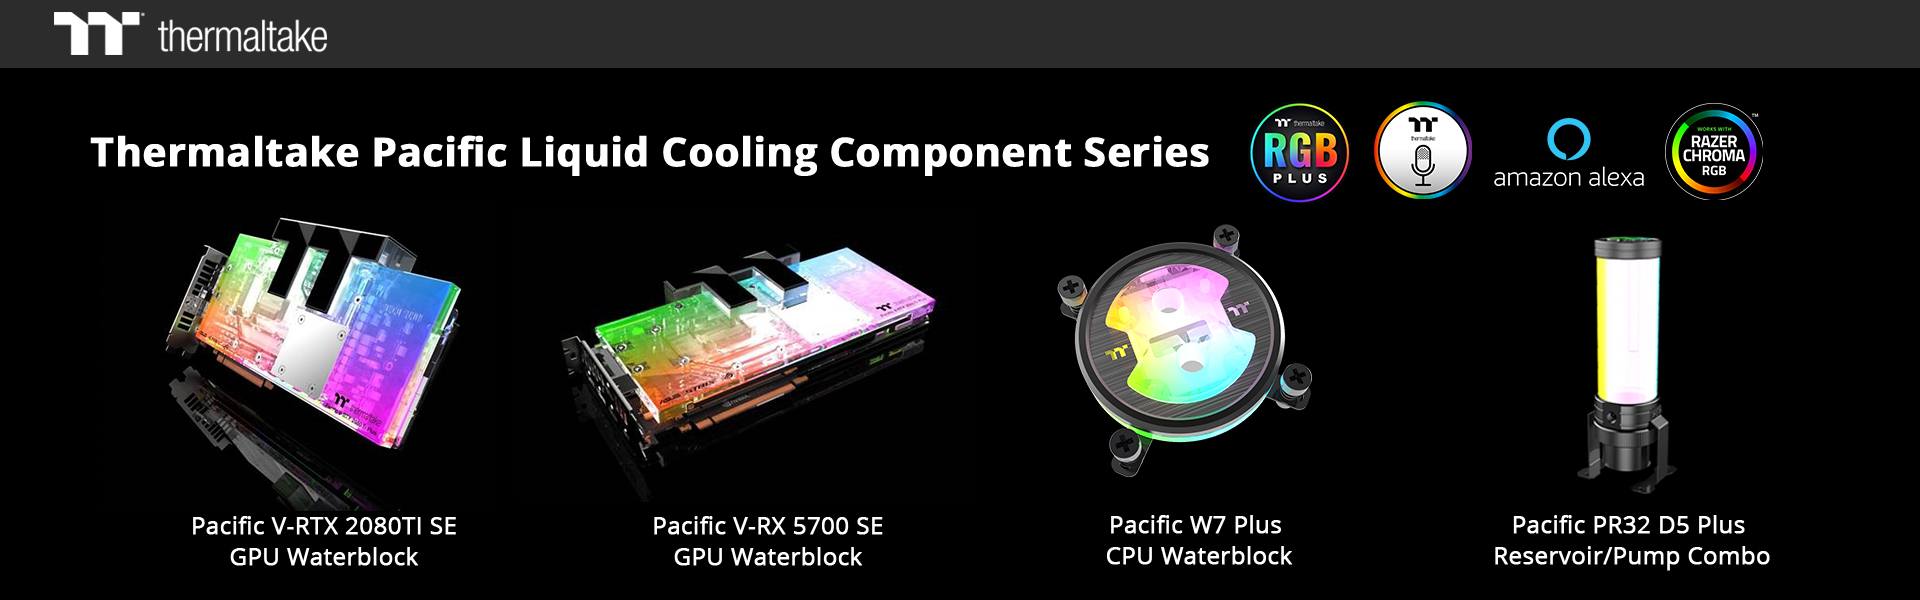 Thermaltake Released  Pacific Series High-End Liquid Cooling Components